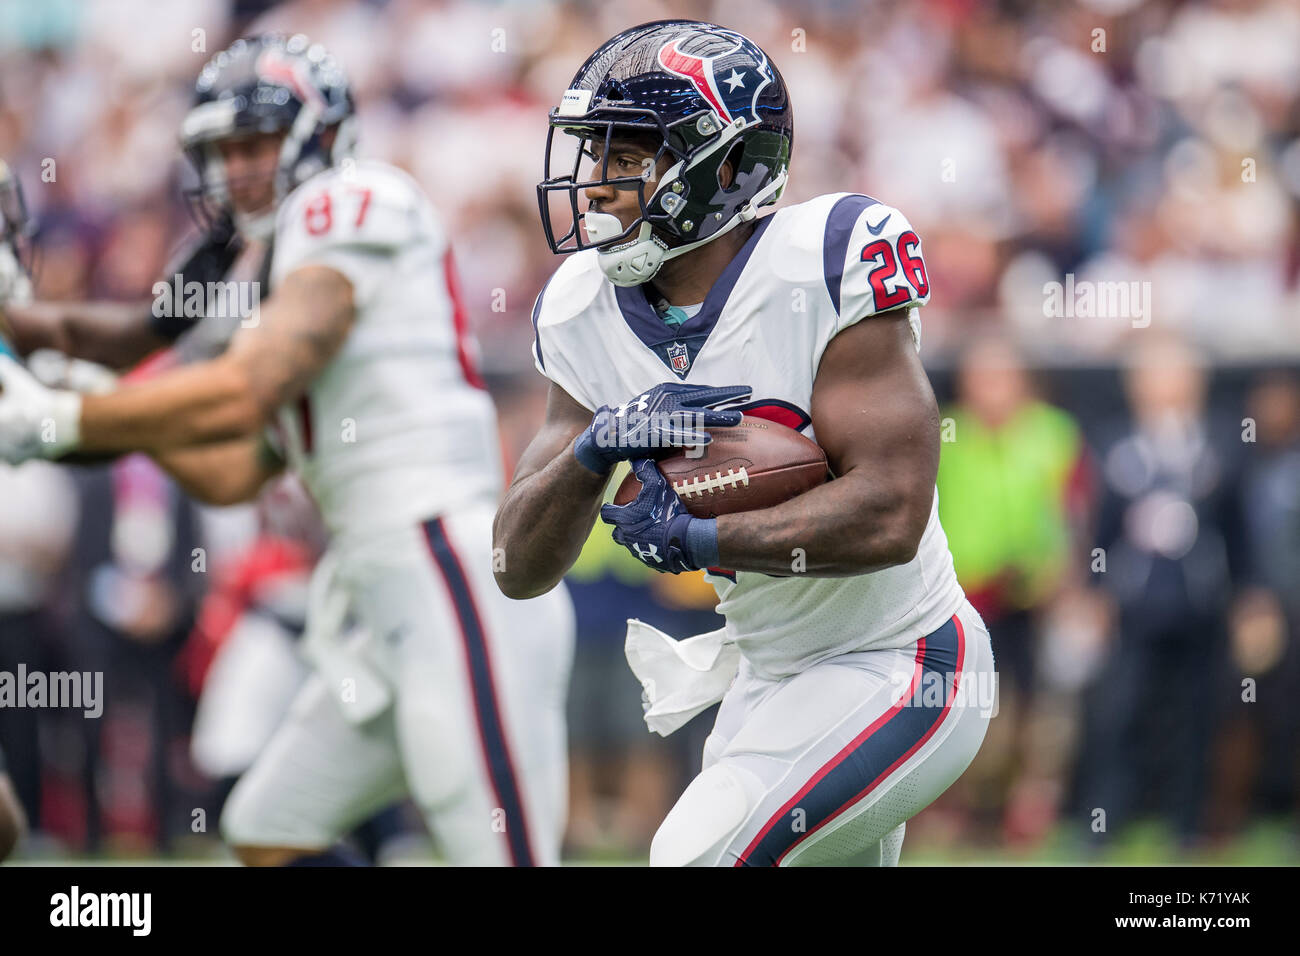 Houston, TX, USA. 10th Sep, 2017. Houston Texans running back Lamar Miller (26) carries the ball during the 1st quarter of an NFL football game between the Houston Texans and the Jacksonville Jaguars at NRG Stadium in Houston, TX. The Jaguars won the game 29-7.Trask Smith/CSM/Alamy Live News Stock Photo